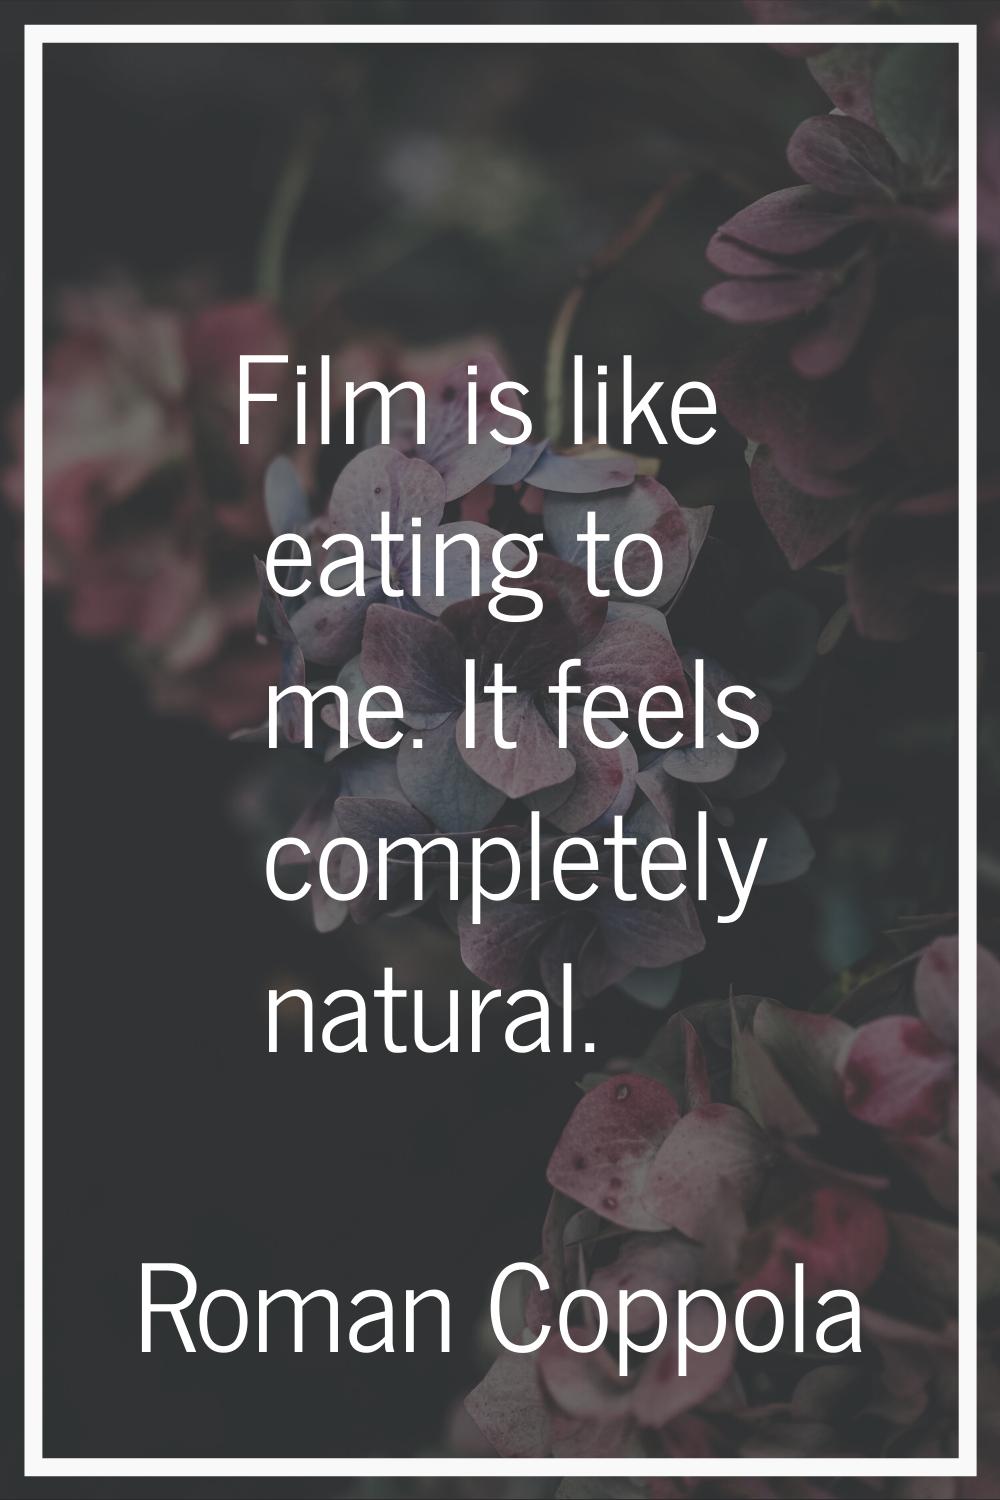 Film is like eating to me. It feels completely natural.